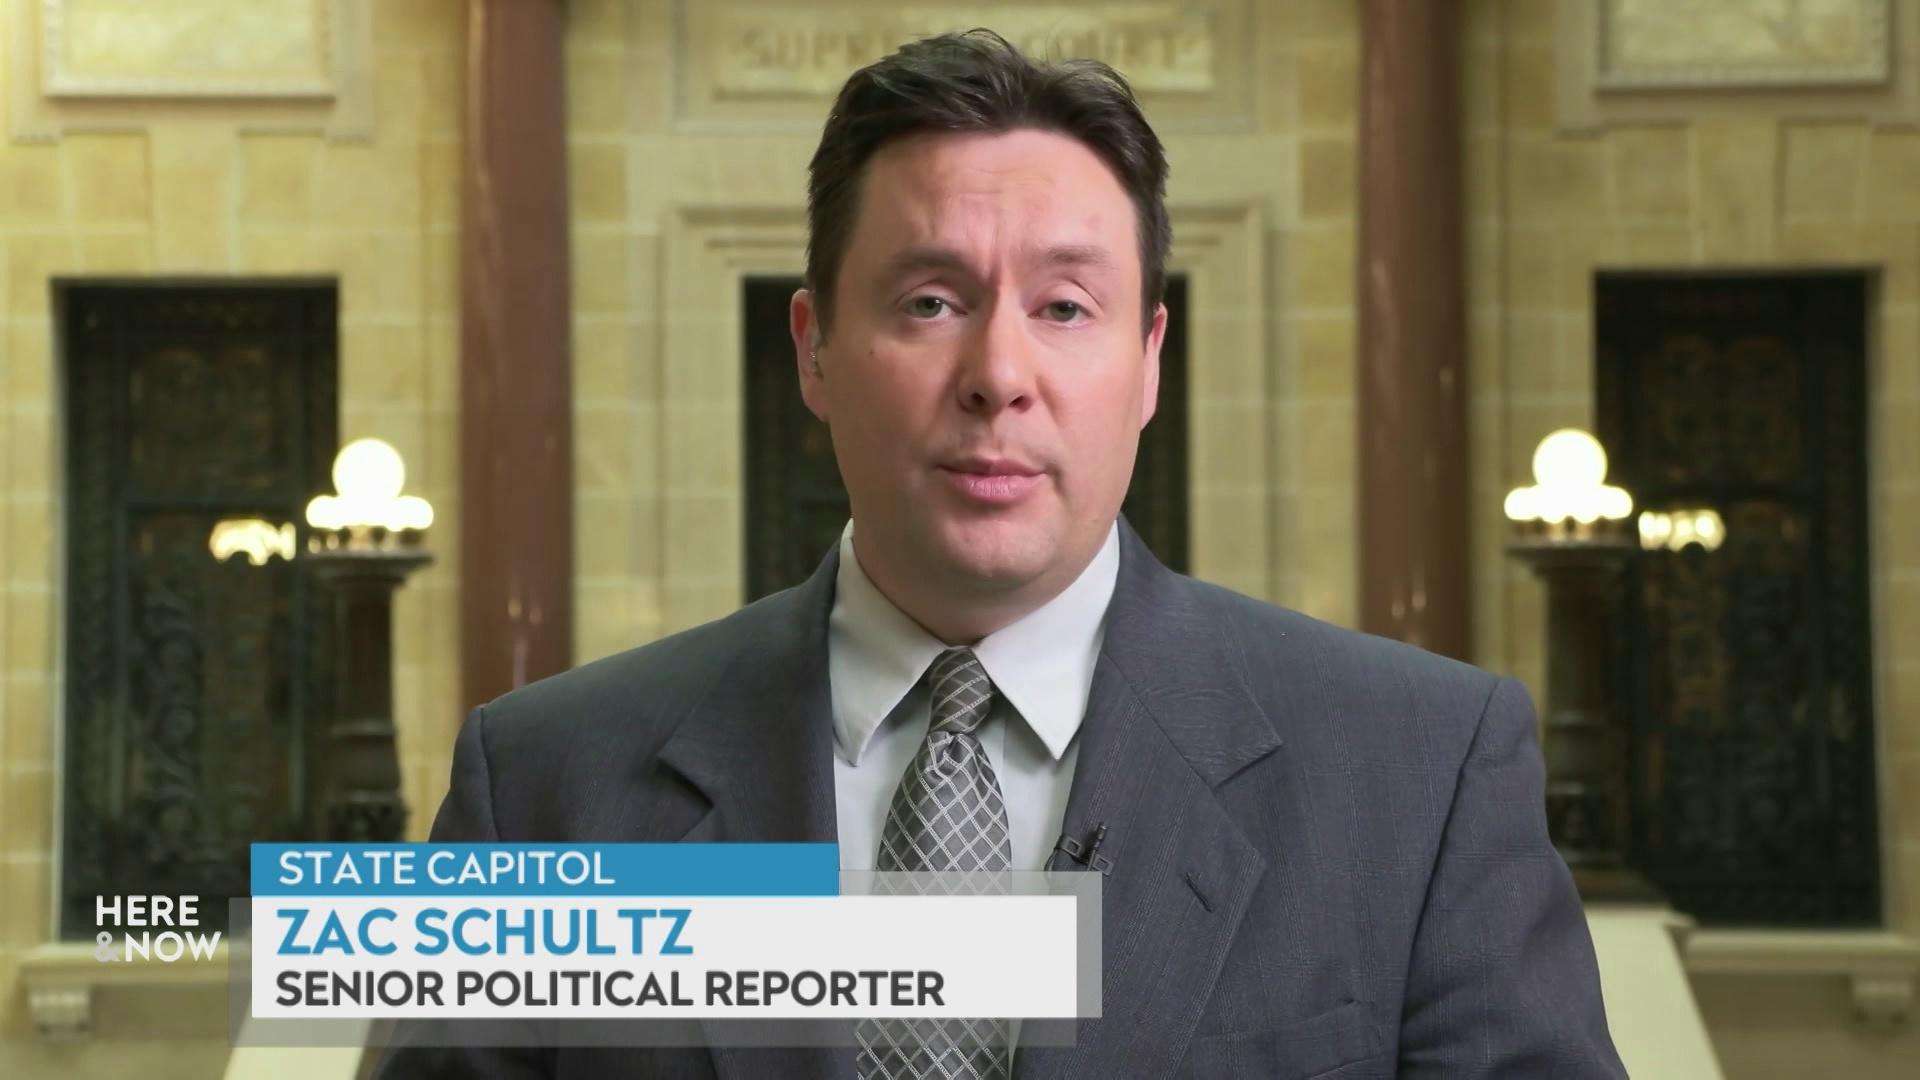  A still image from a video shows Zac Schultz standing in front of the Wisconsin Supreme Court chambers at the state Capitol with a graphic at bottom reading 'Zac Schultz' and 'Senior Political Reporter.'